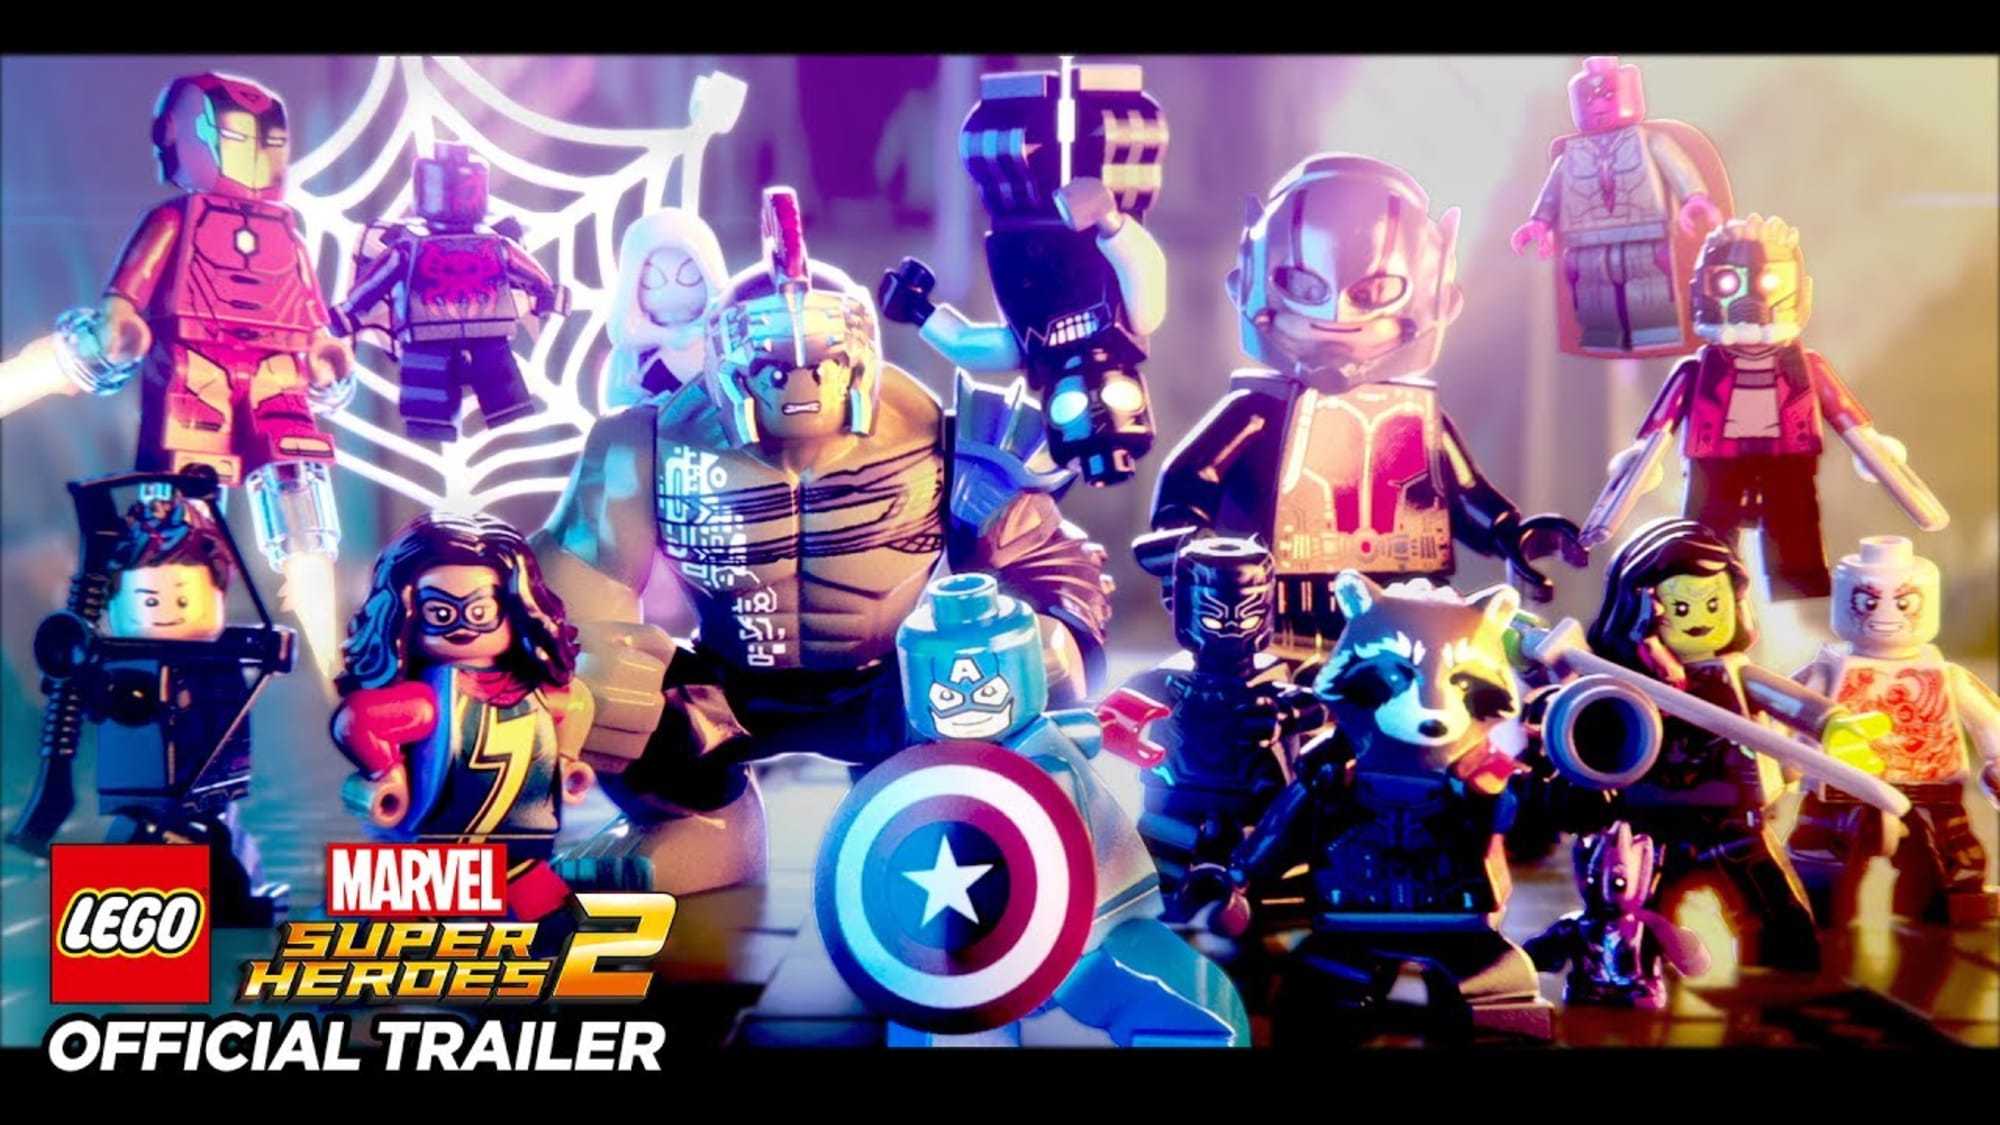 See announce trailer for Lego Super Heroes 2